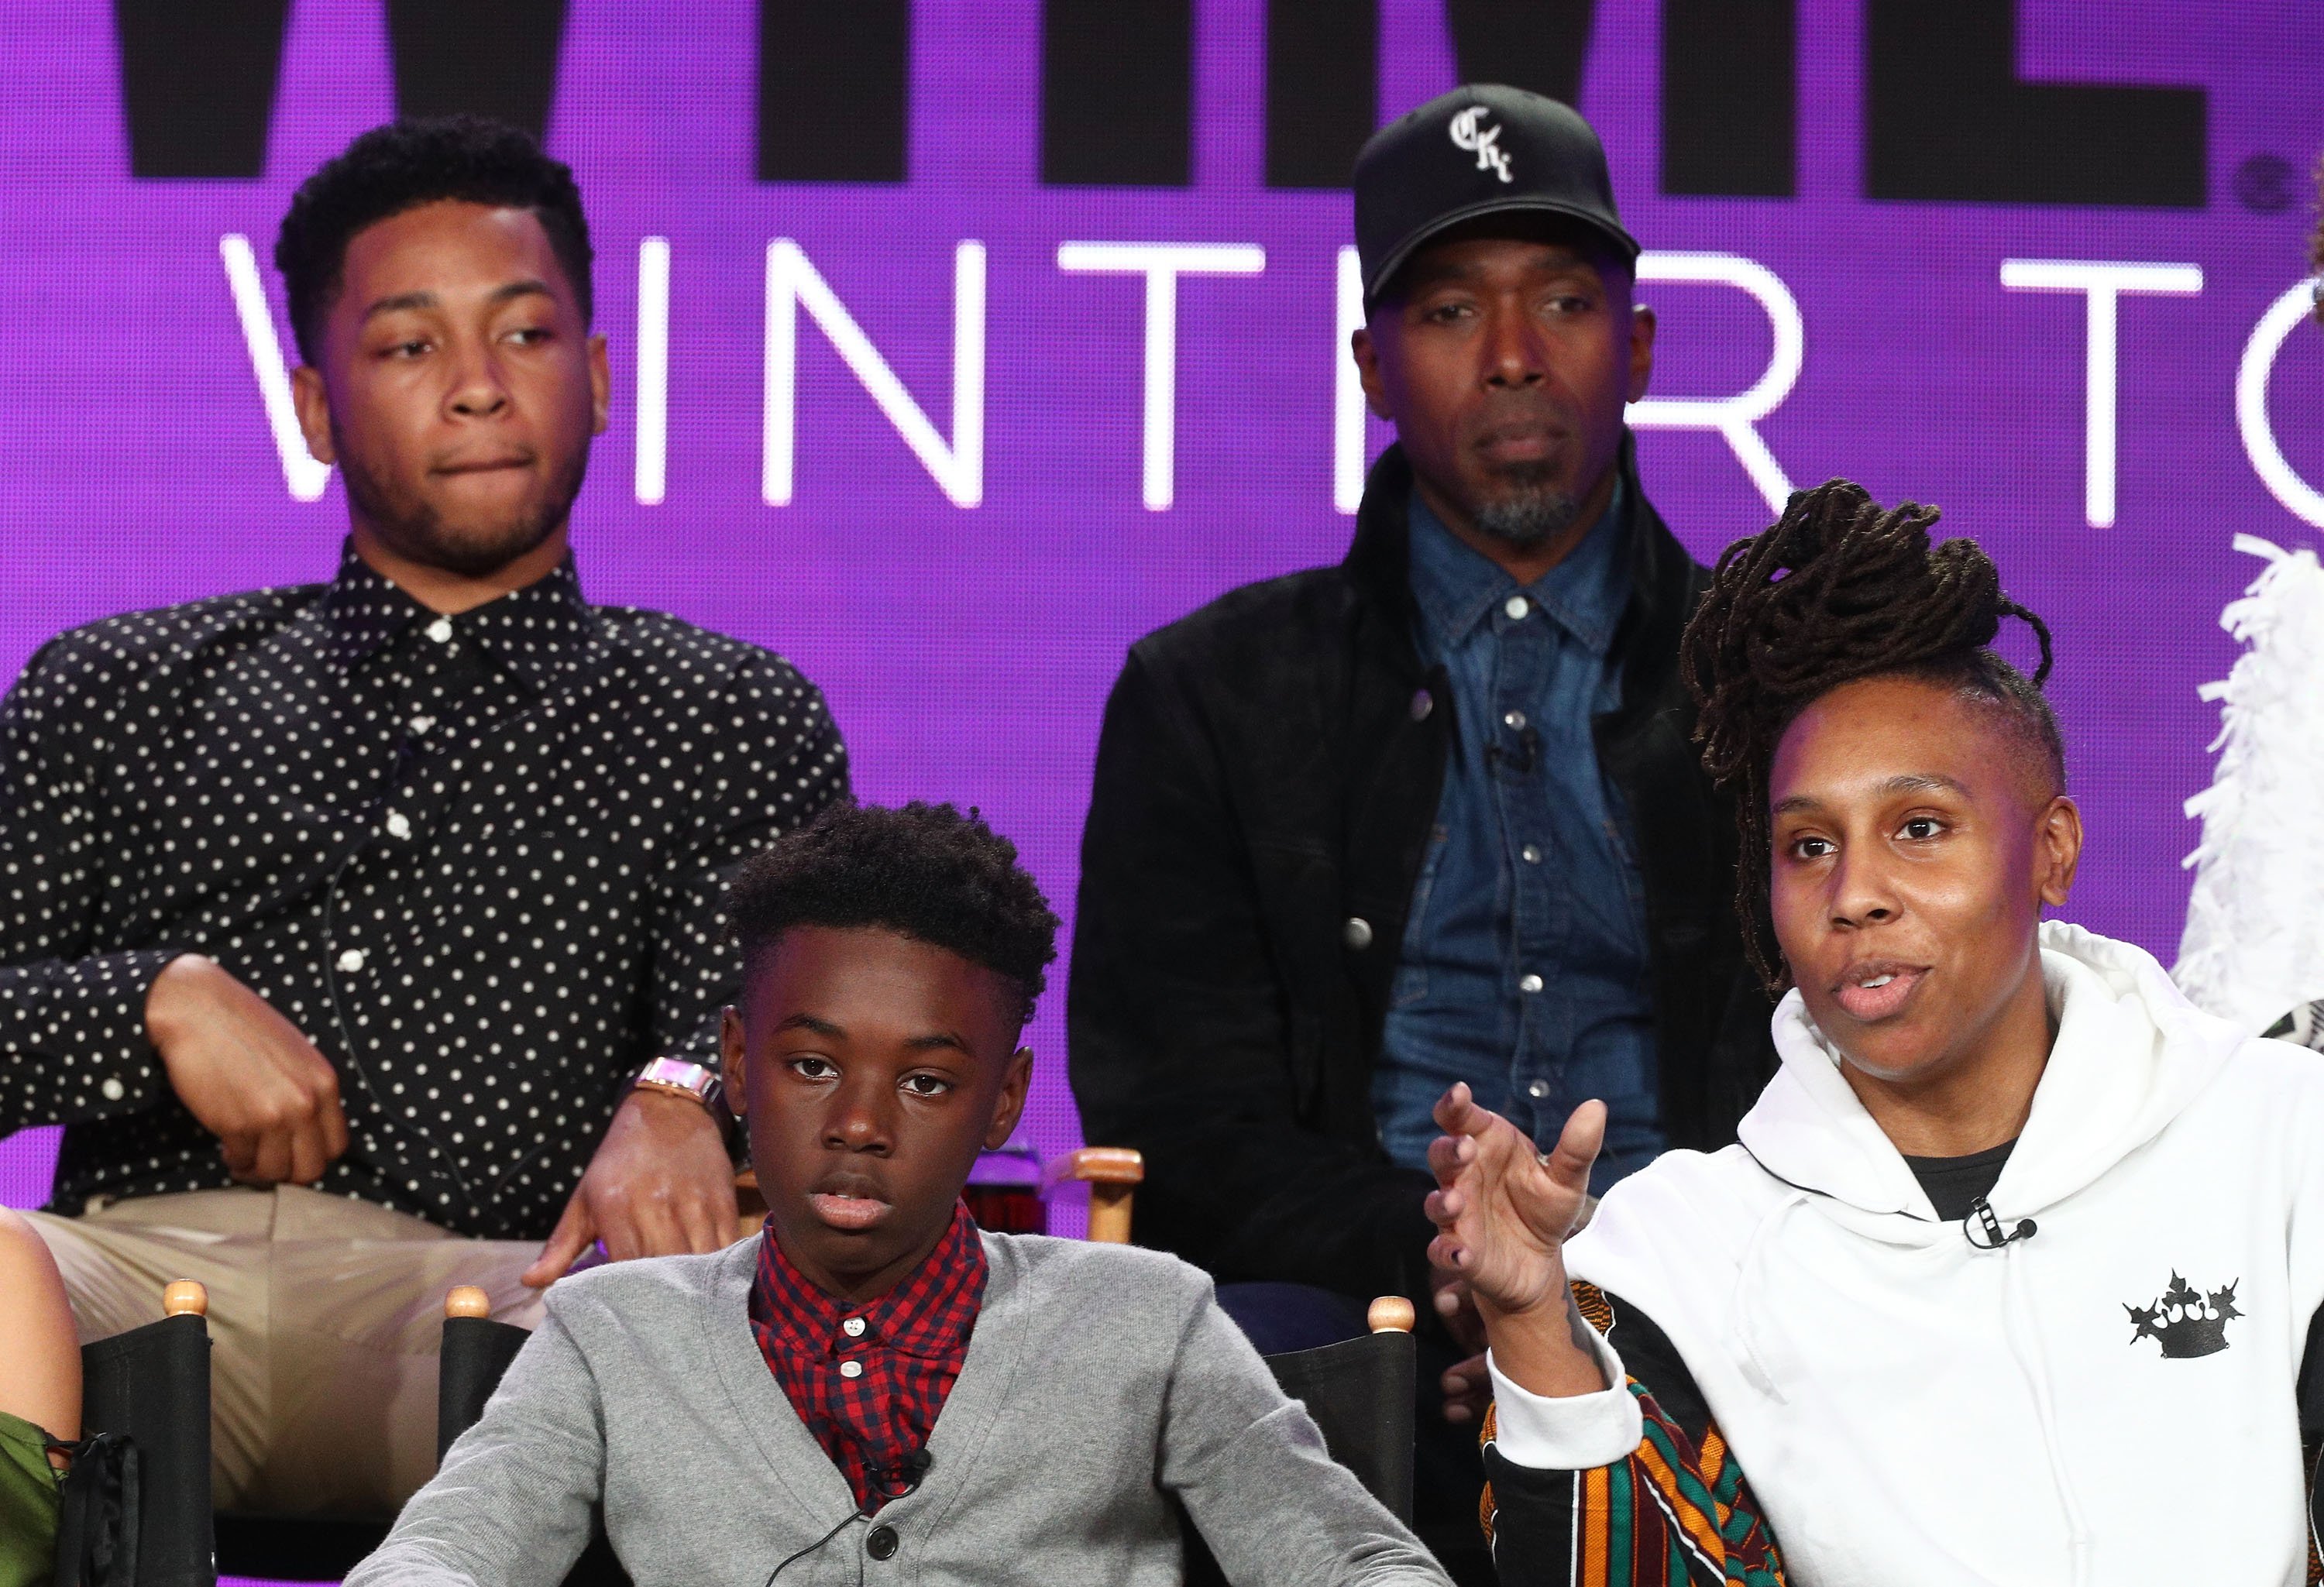 Actors Jacob Latimore, Ntare Guma Mbaho Mwine, (l-r, front row) actor Alex Hibbert and creator/executive producer and writer Lena Waithe of the television show The Chi speak onstage during the CBS/Showtime portion of the 2018 Winter Television Critics Association Press Tour